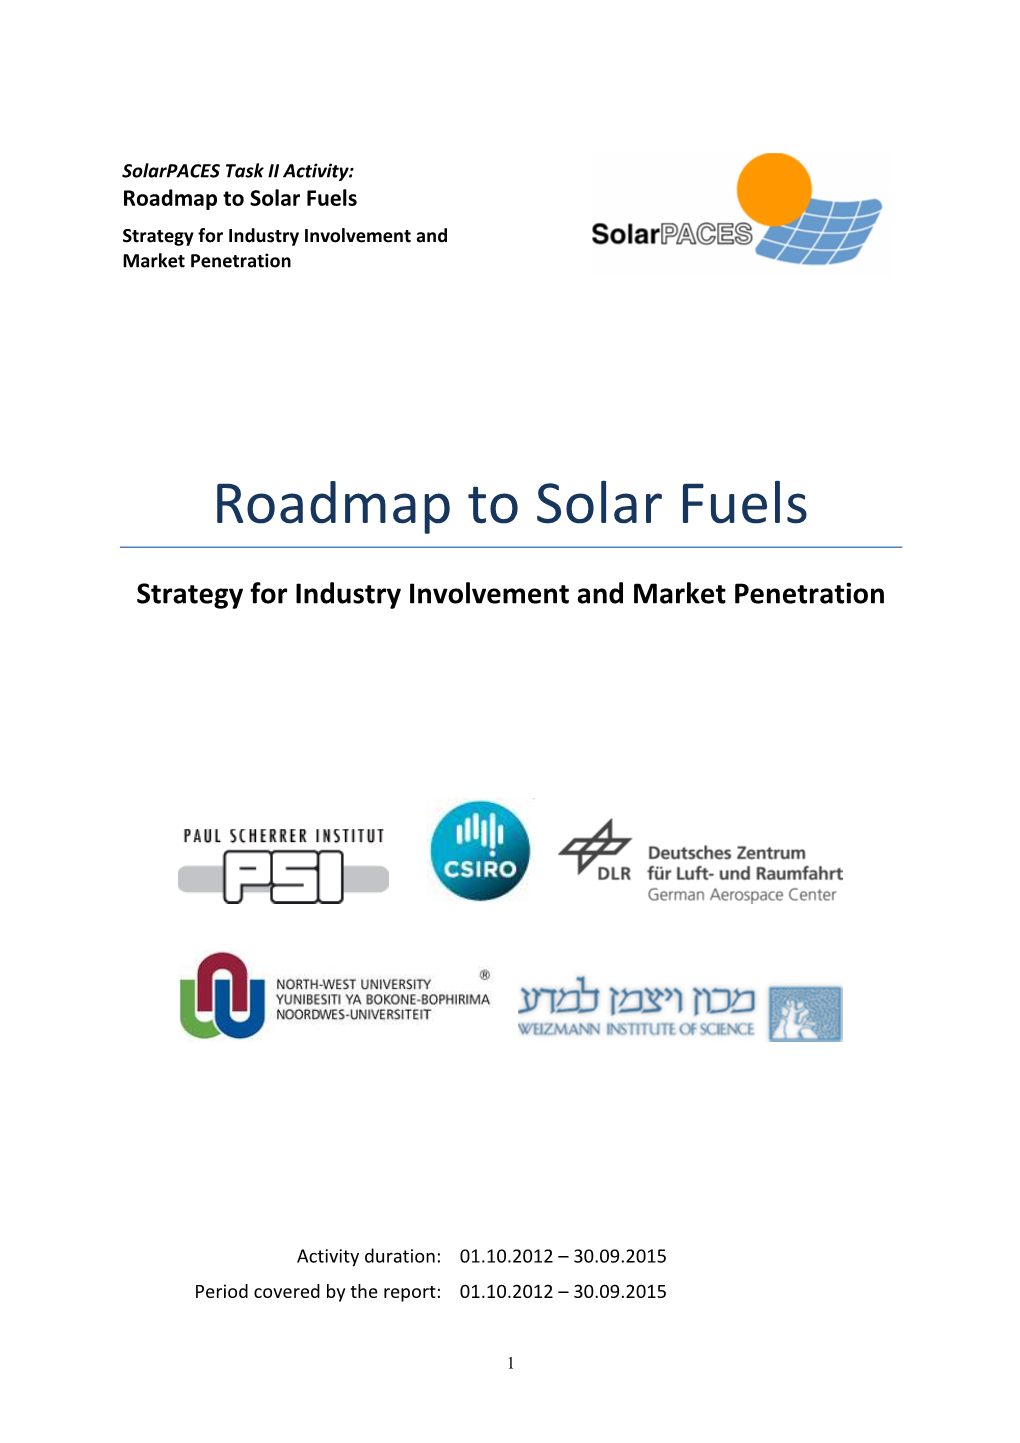 Roadmap to Solar Fuels Strategy for Industry Involvement and Market Penetration